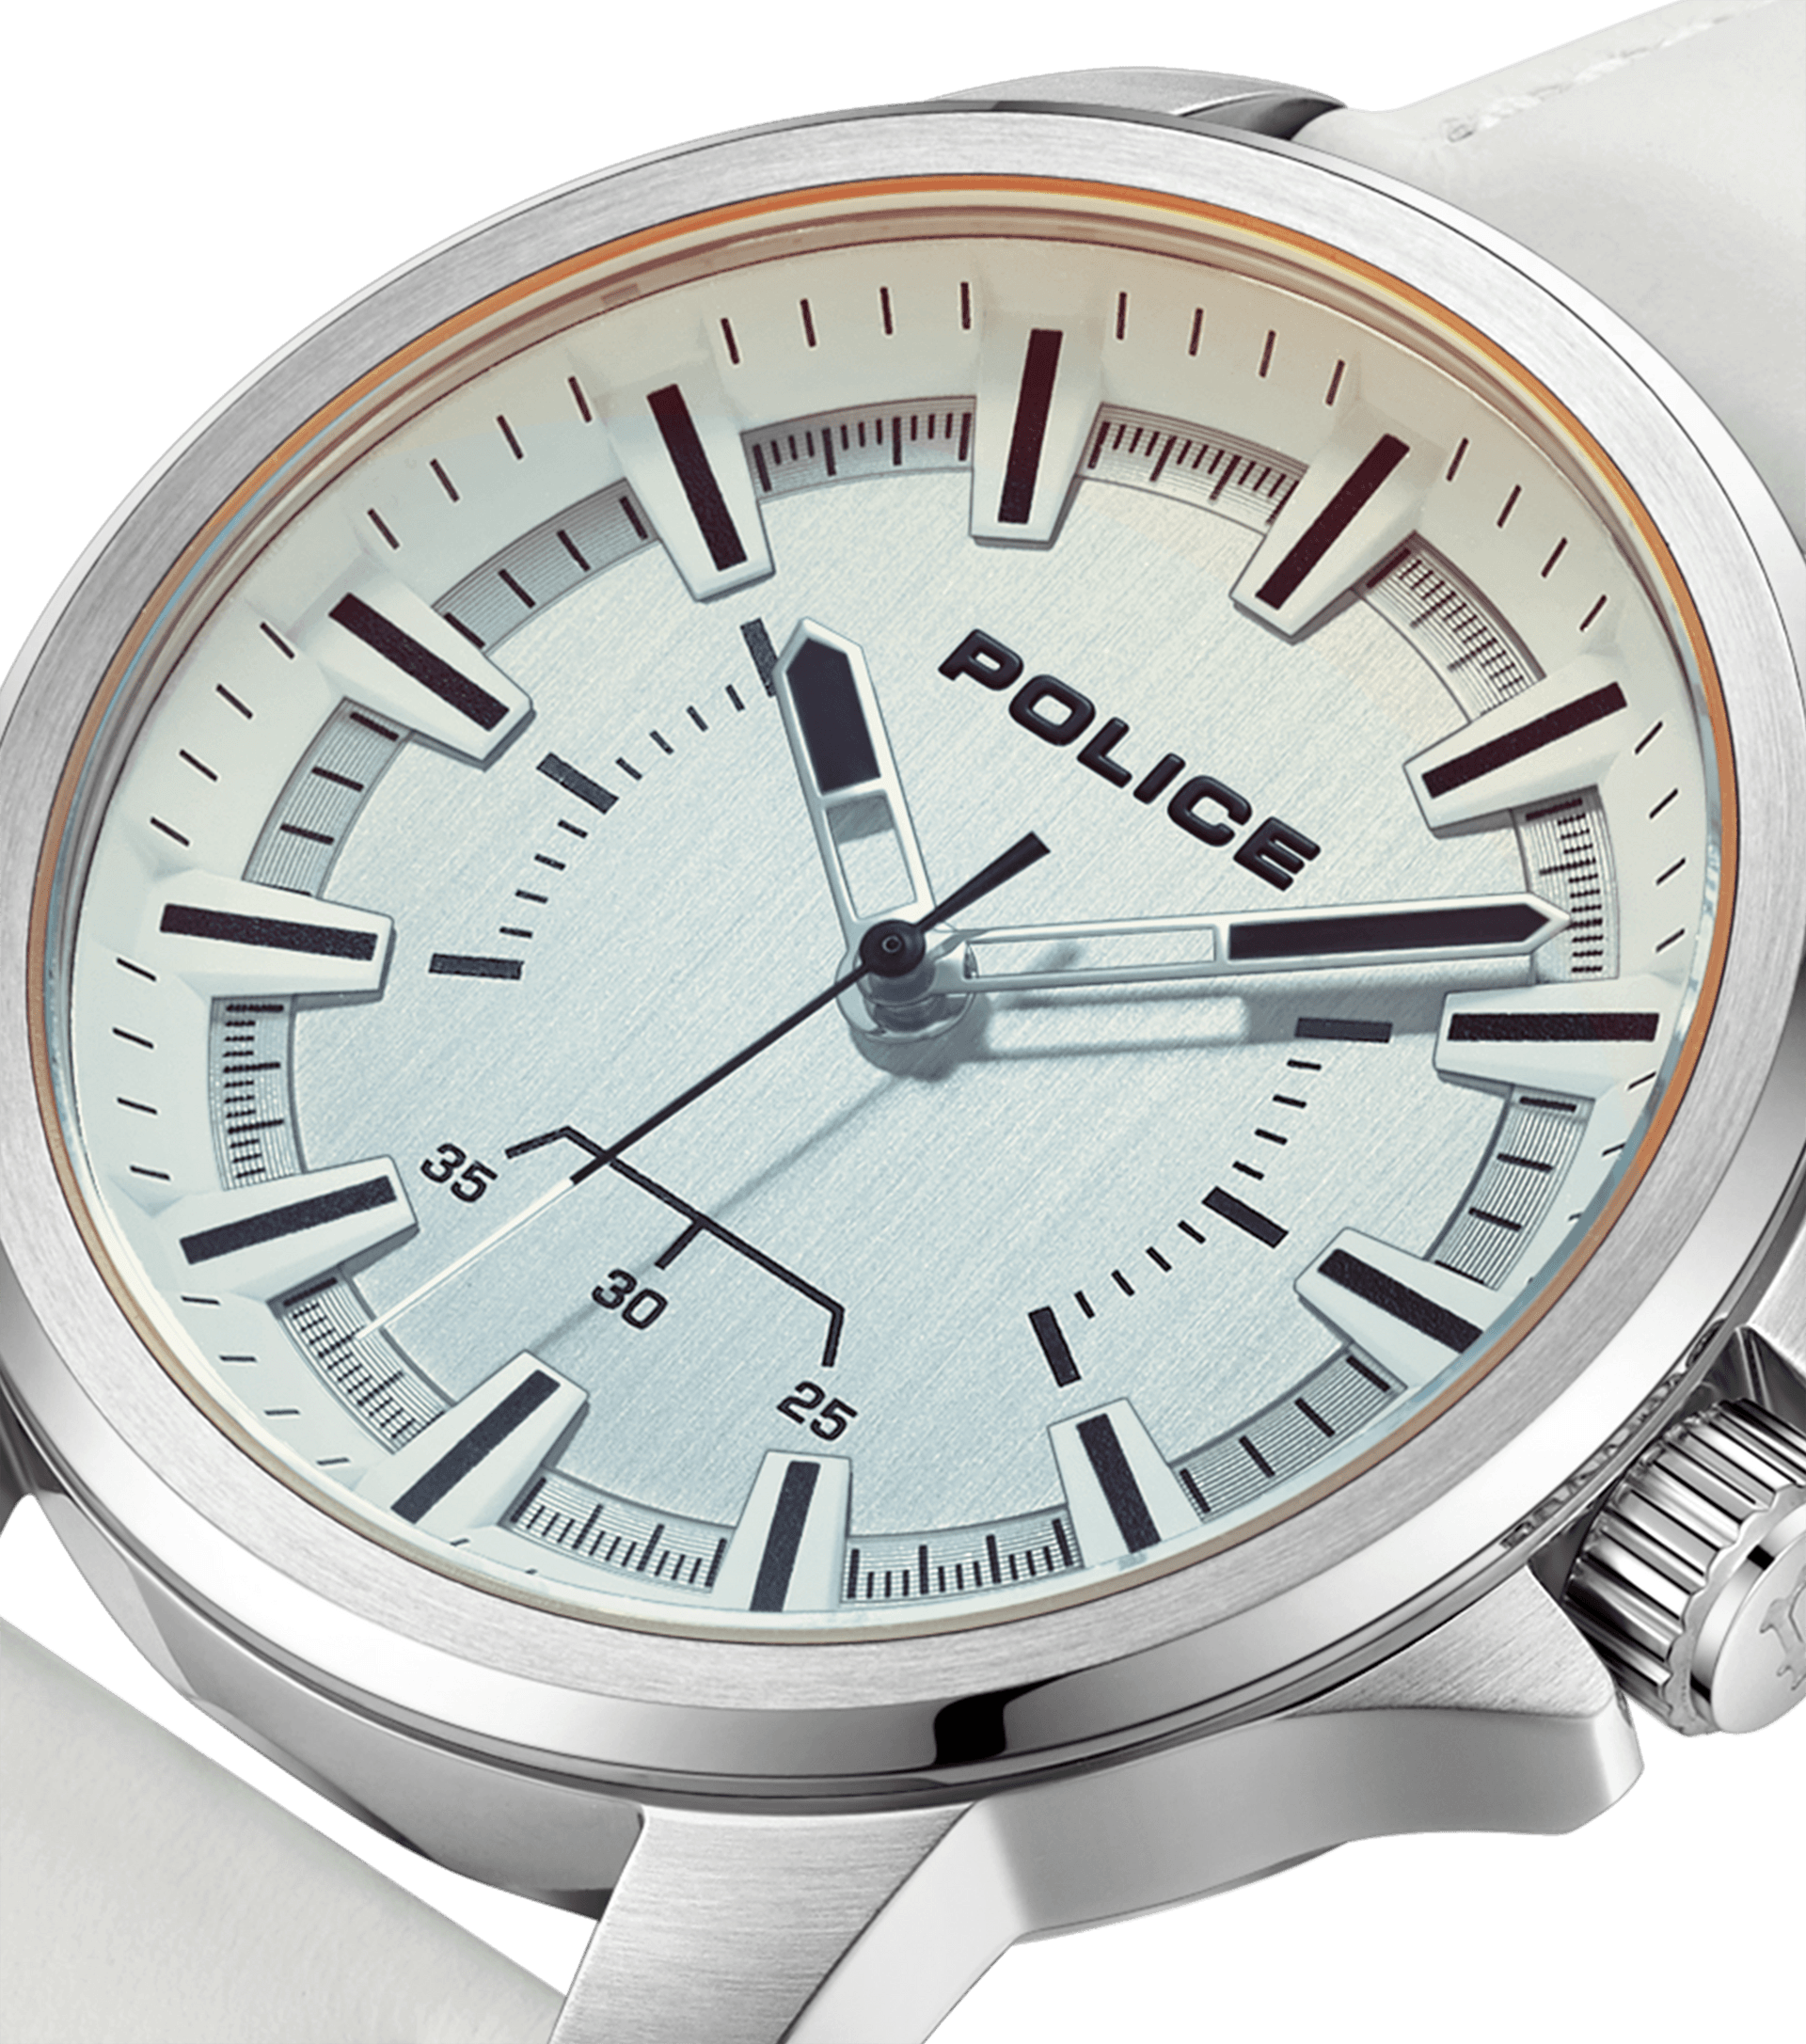 Police watches - Mensor Watch Police For Men Black, Grey